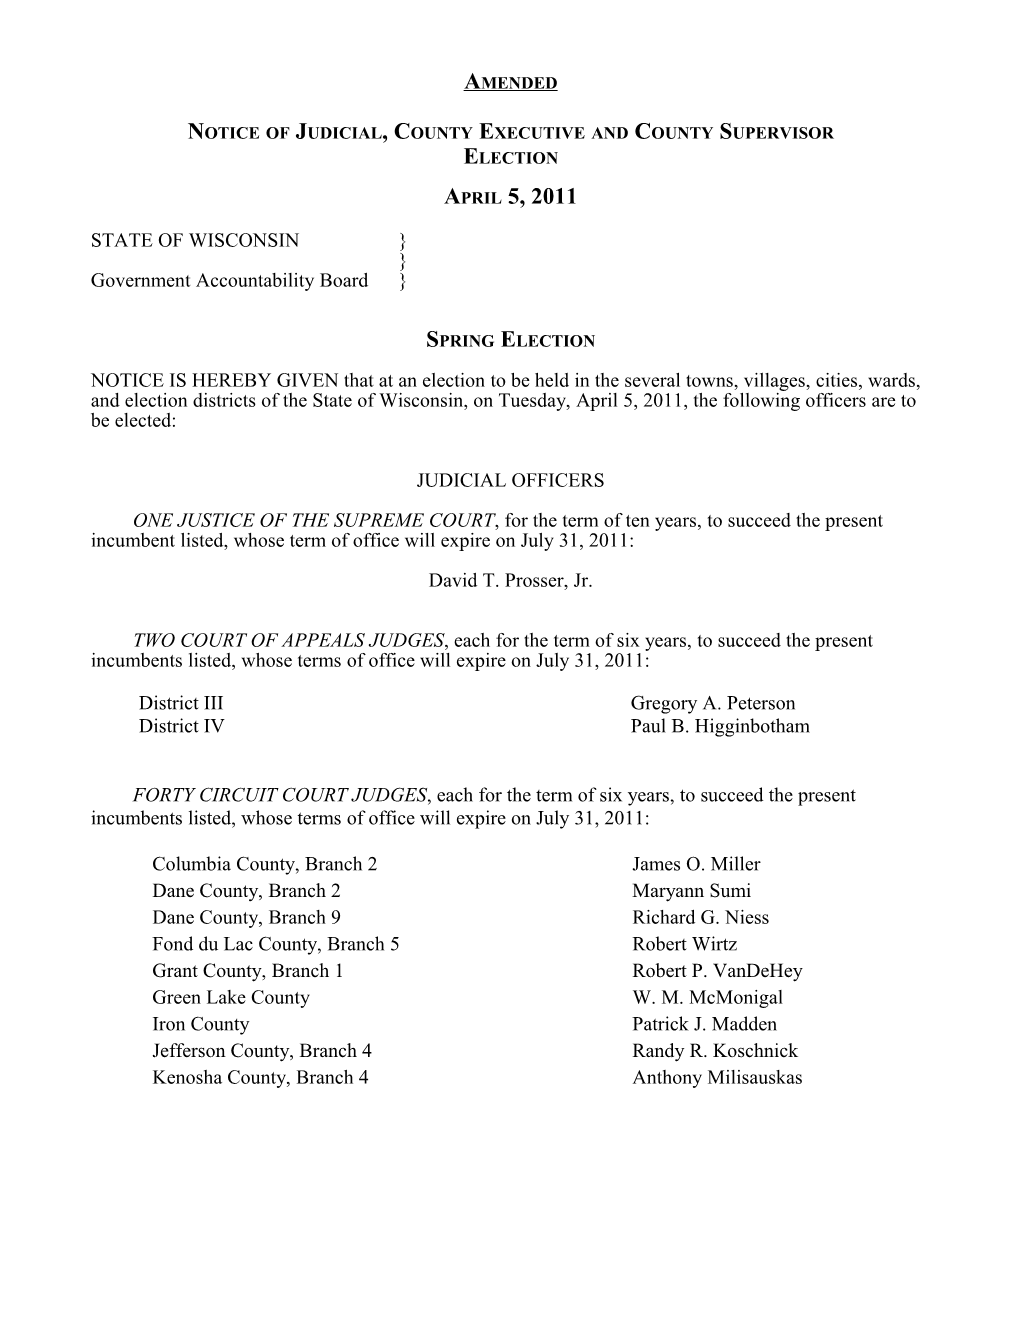 Notice of Judicial, County Executive and County Supervisor